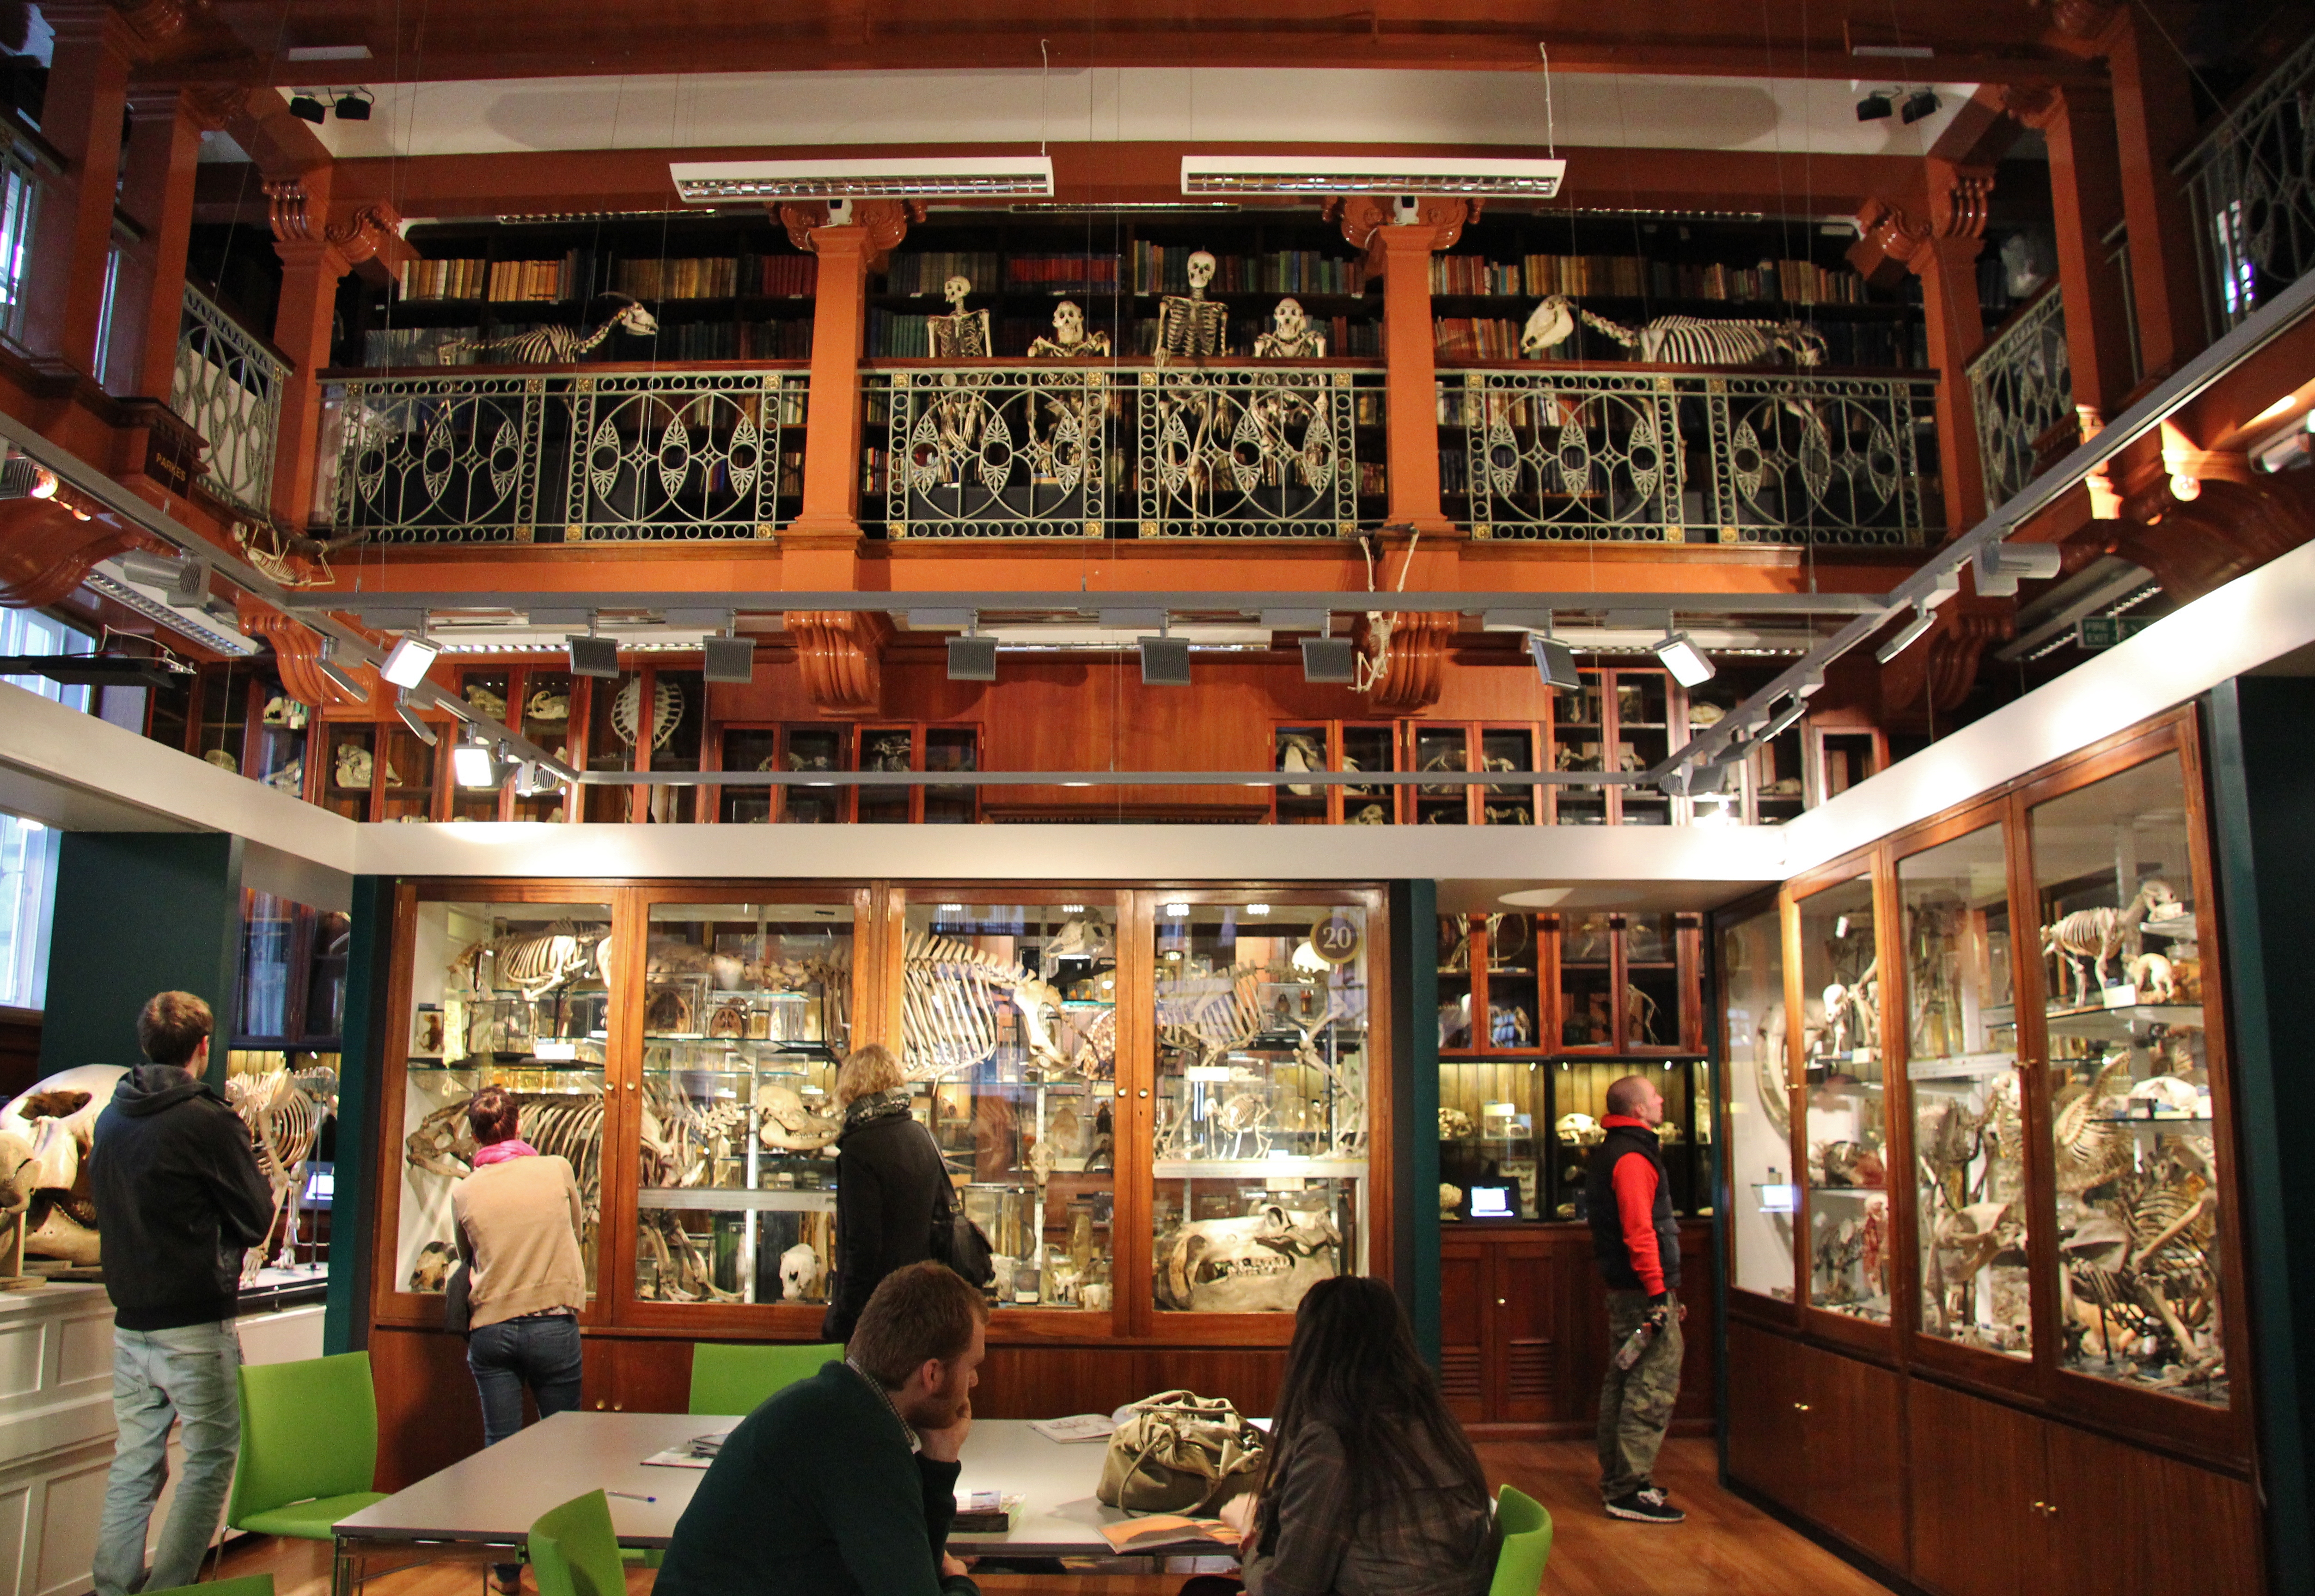 Inside Grant Museum of Zoology, London